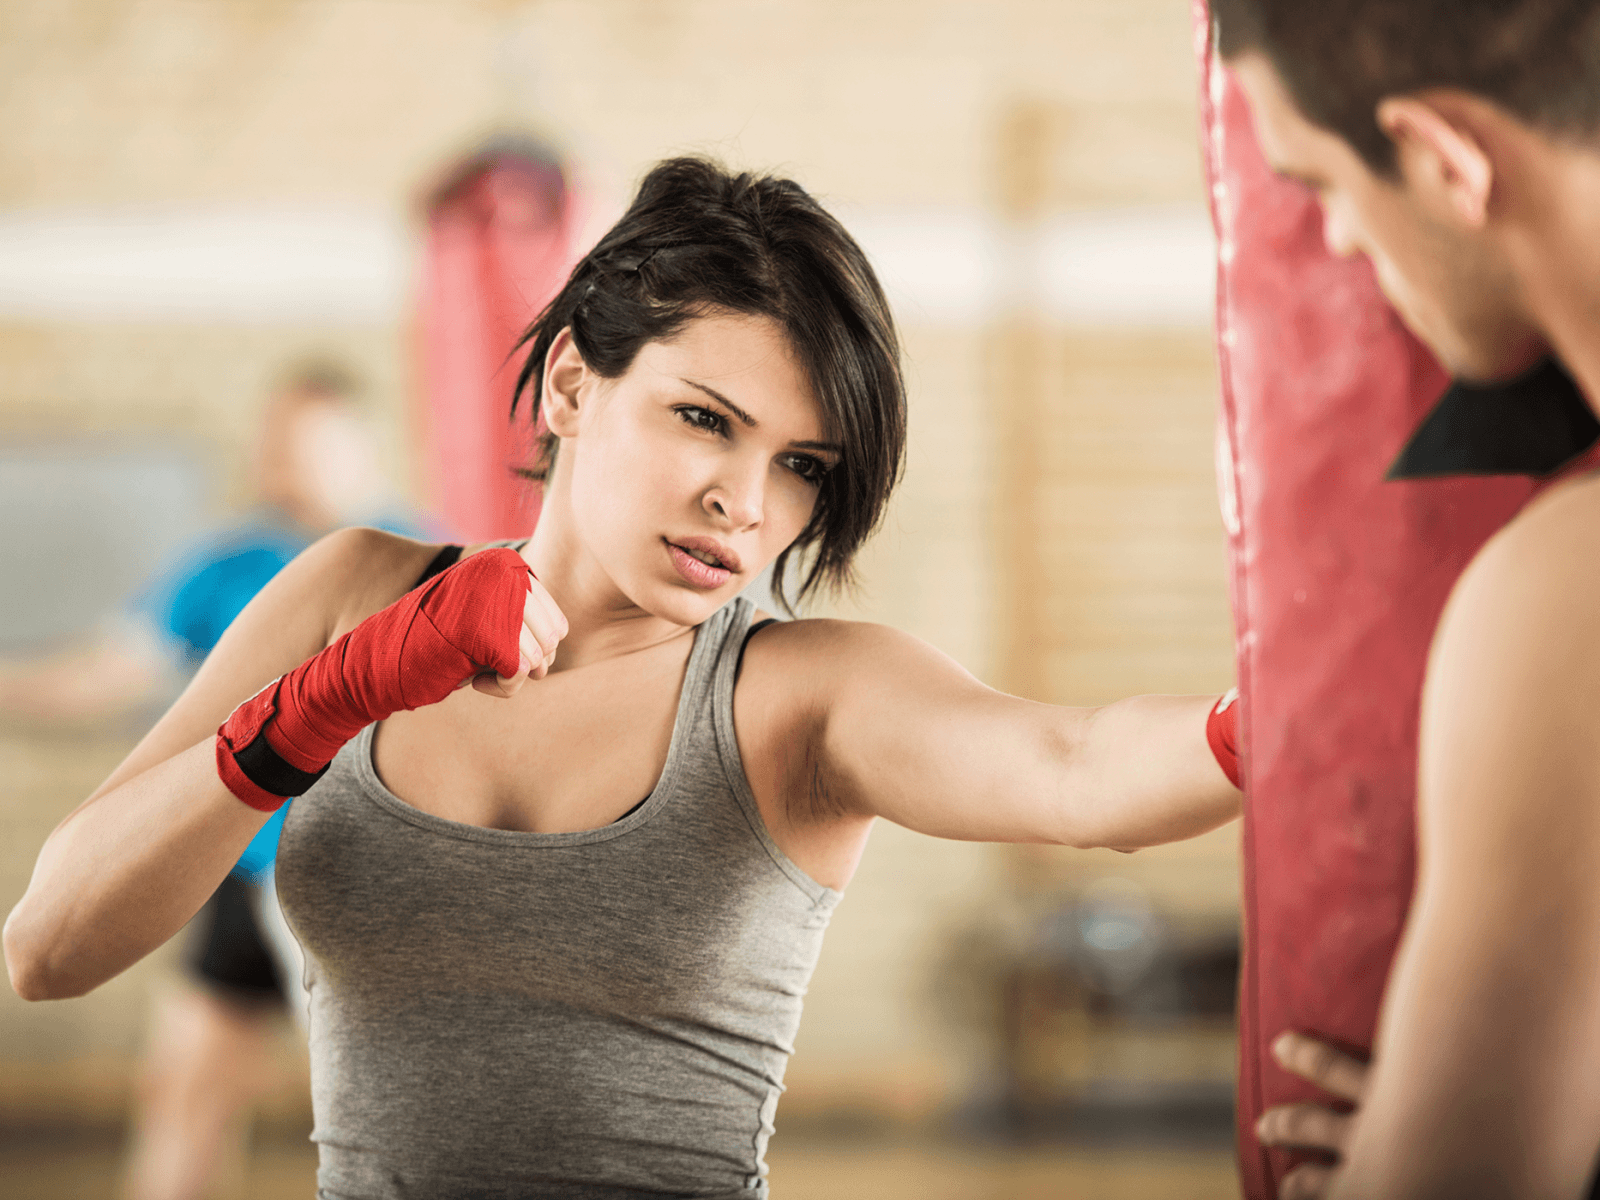 Download 1600x1200 workout, boxing, fitness, sport, women, boxing